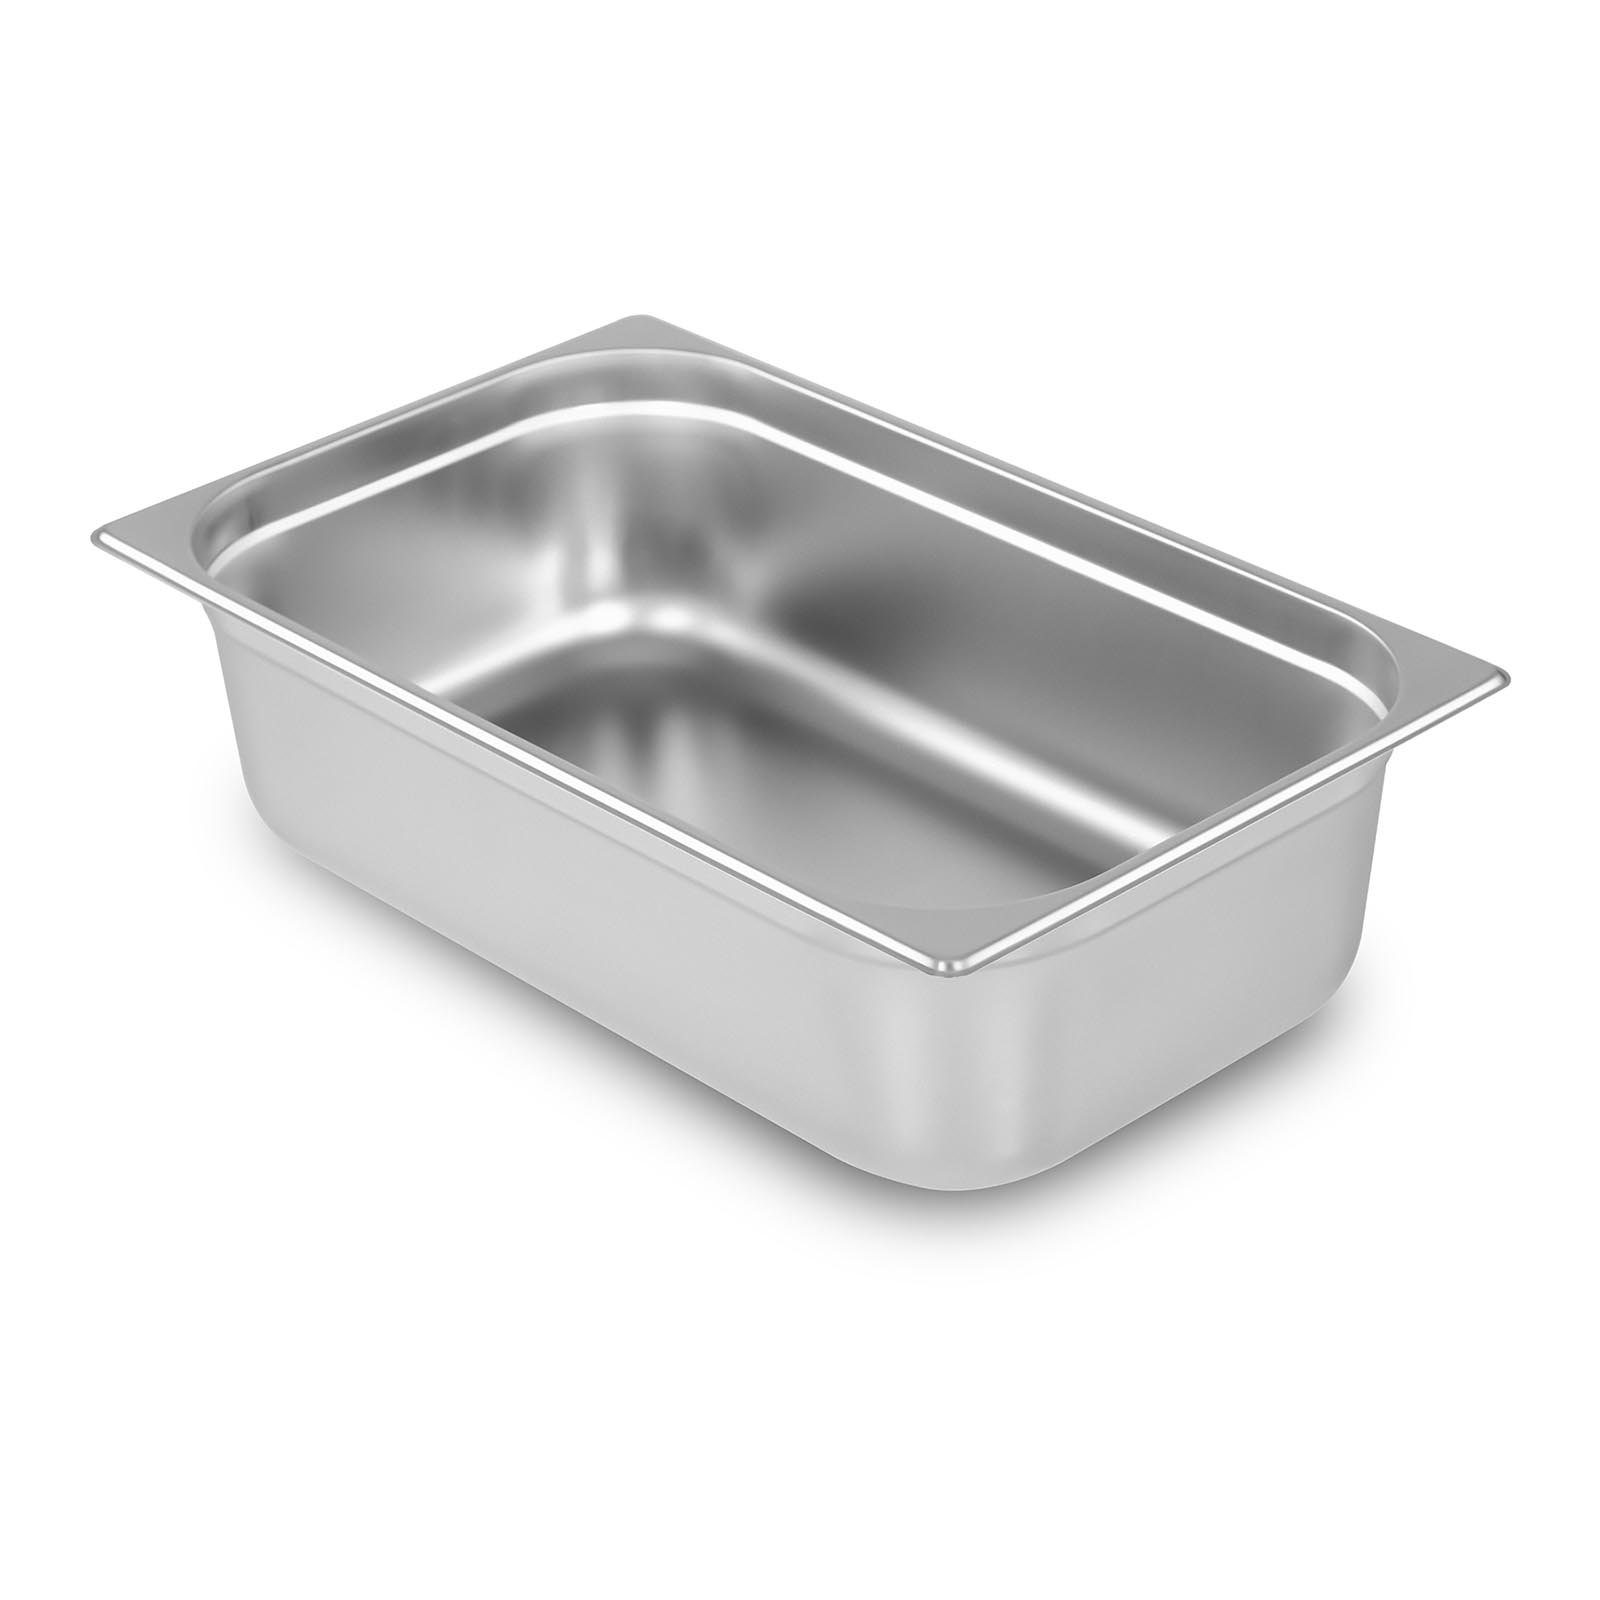 1 GN Behälter L, Tief Volumen 20 mm Thermobehälter Gastronorm Royal Bainmarie 150 1 Catering Edelstahl